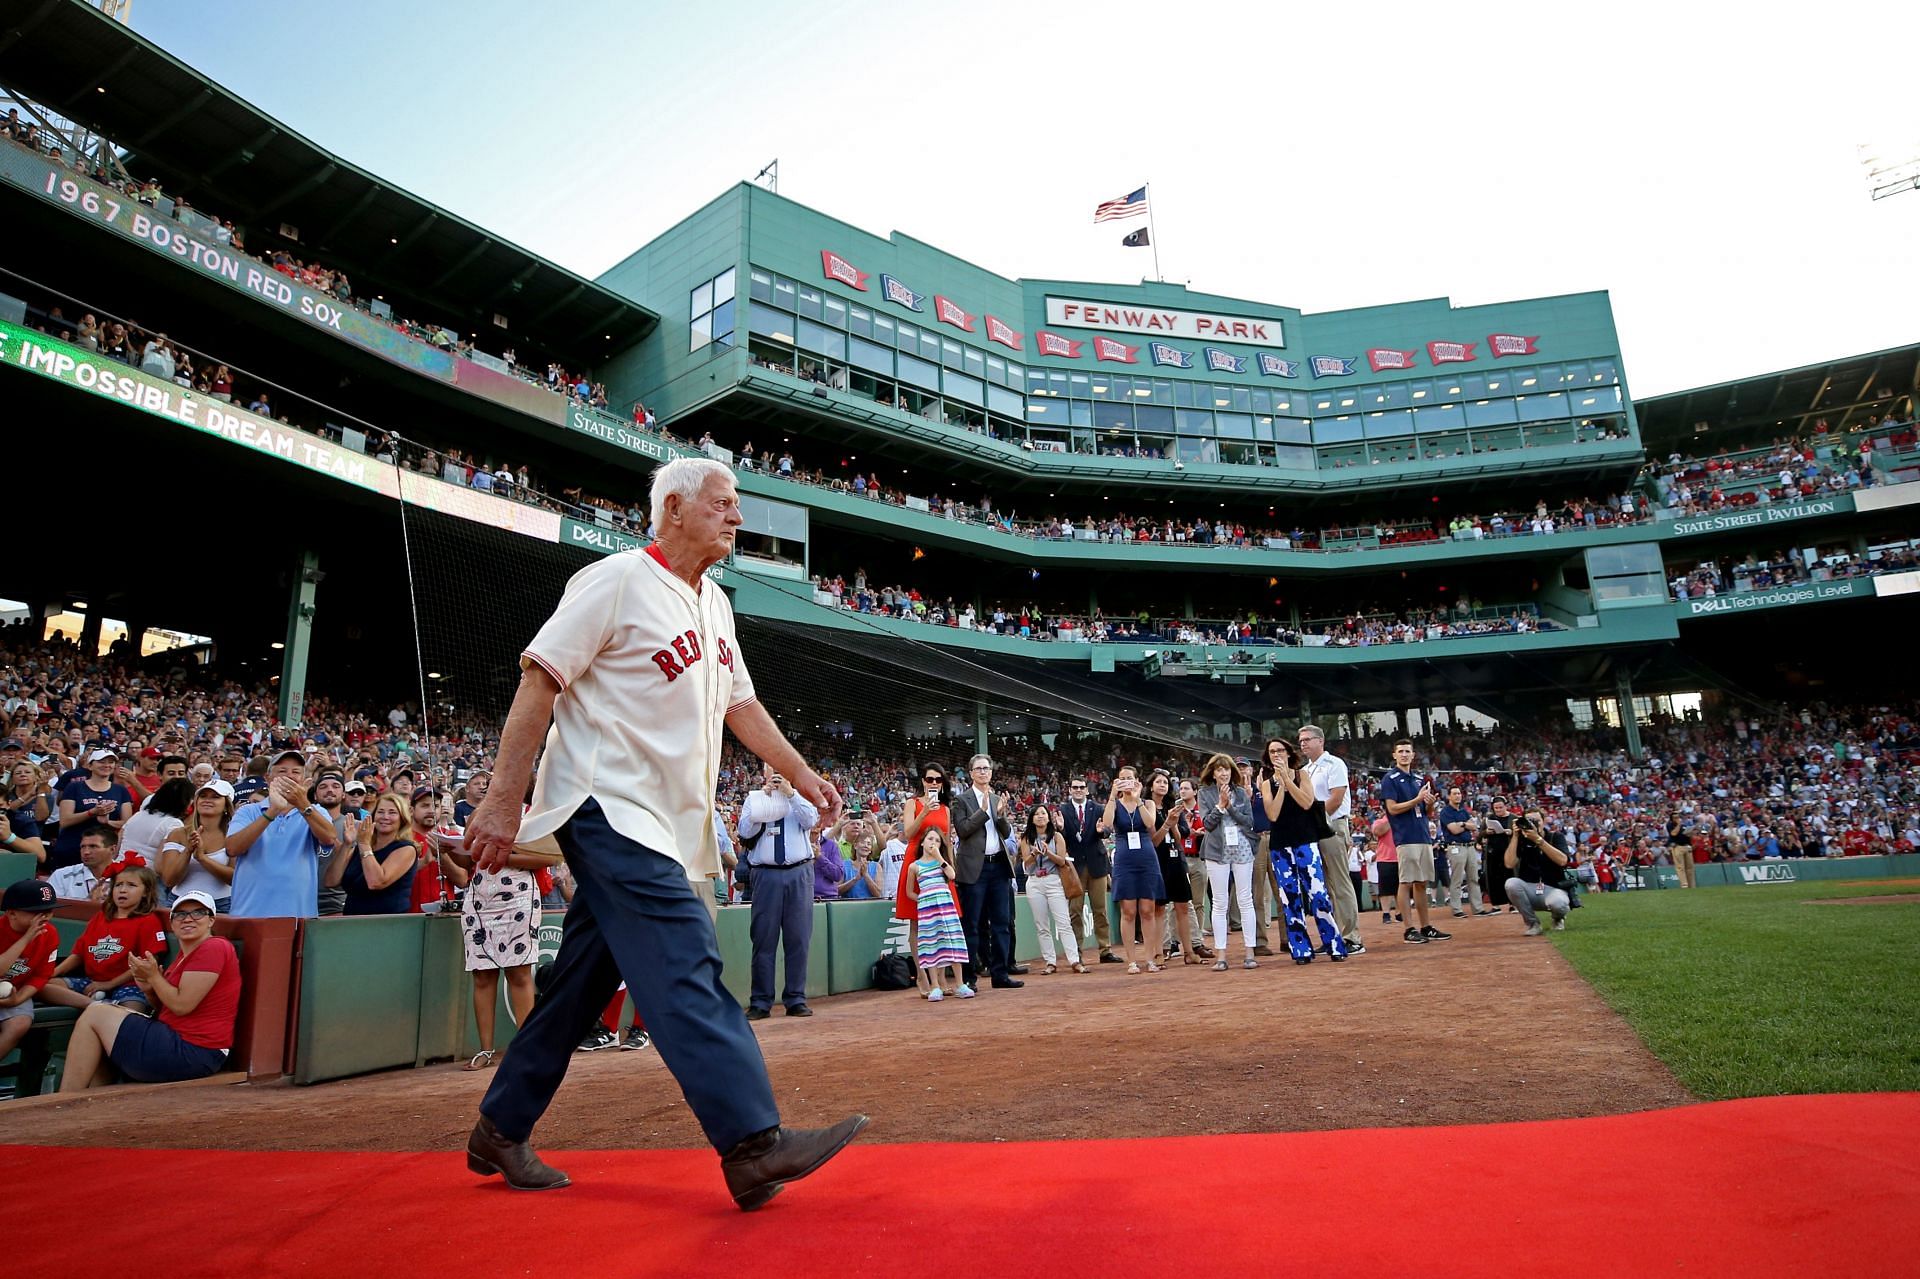 Carl Yastrzemski is recognized during a celebration to honor the American League Champion 1967 Red Sox team